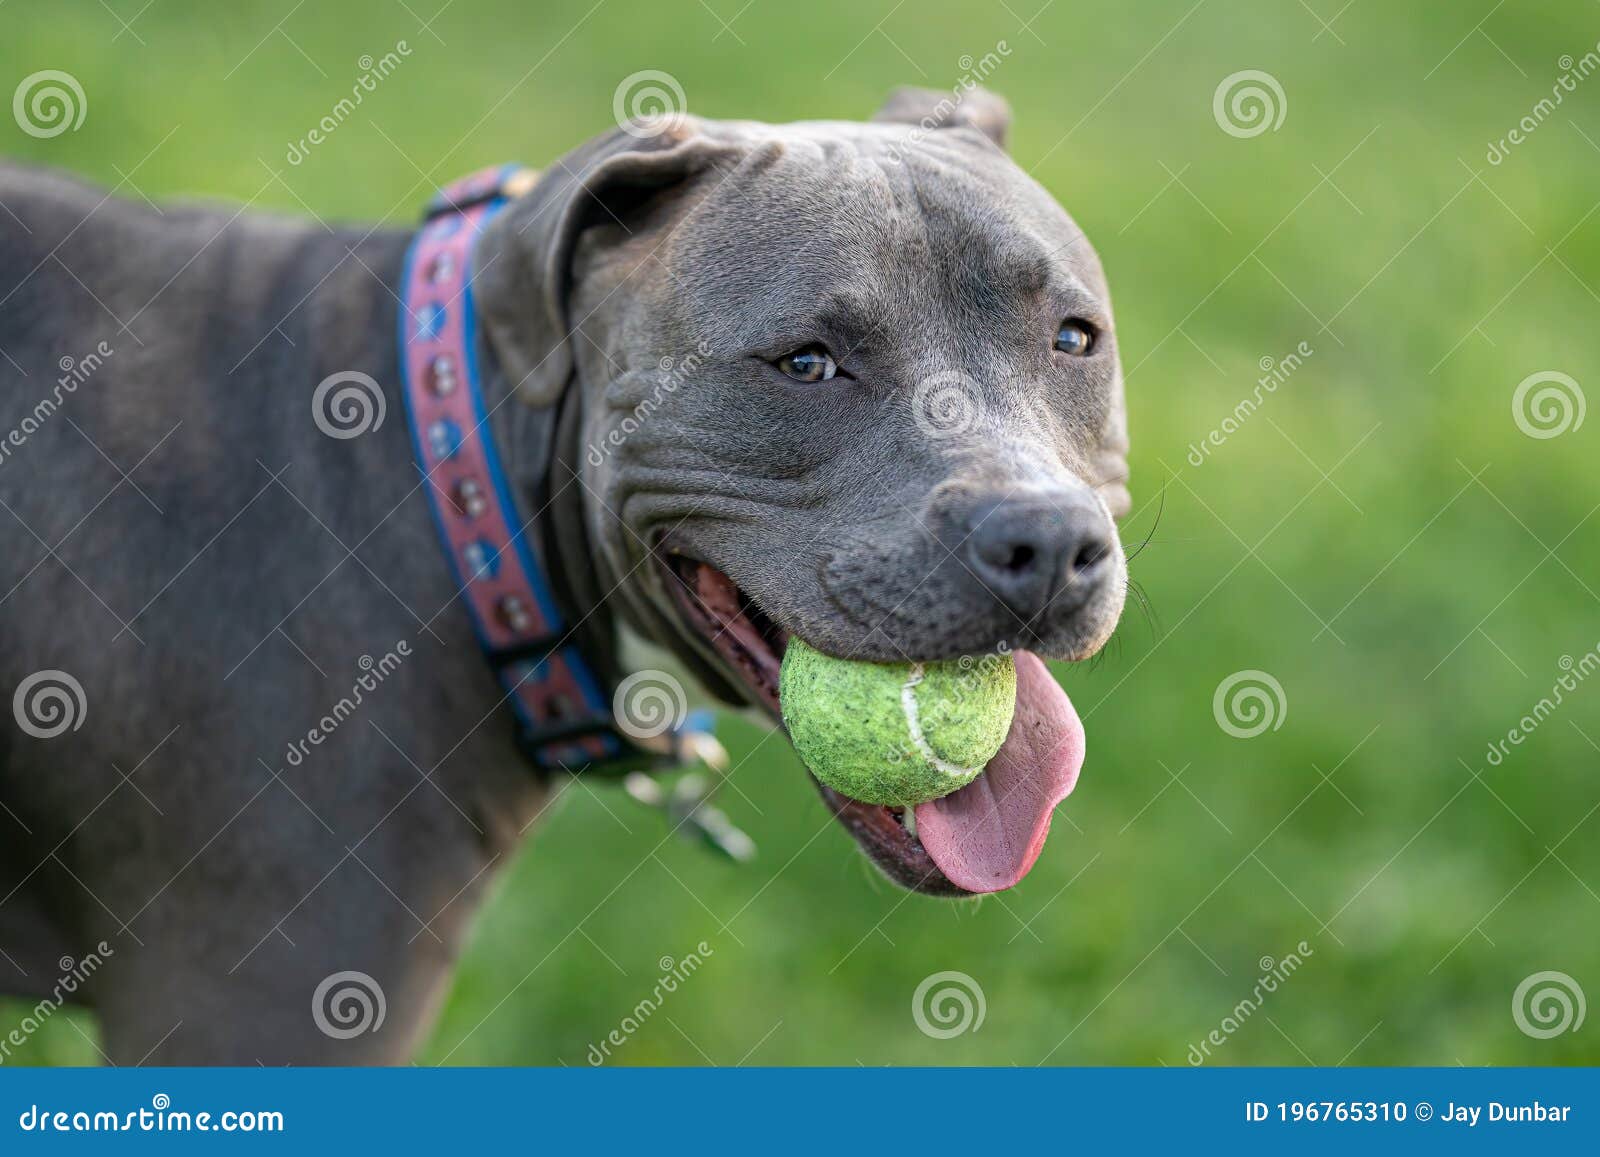 Pitbull Puppy Has Fun Playing Fetch with a Tennis Ball Stock Photo ...